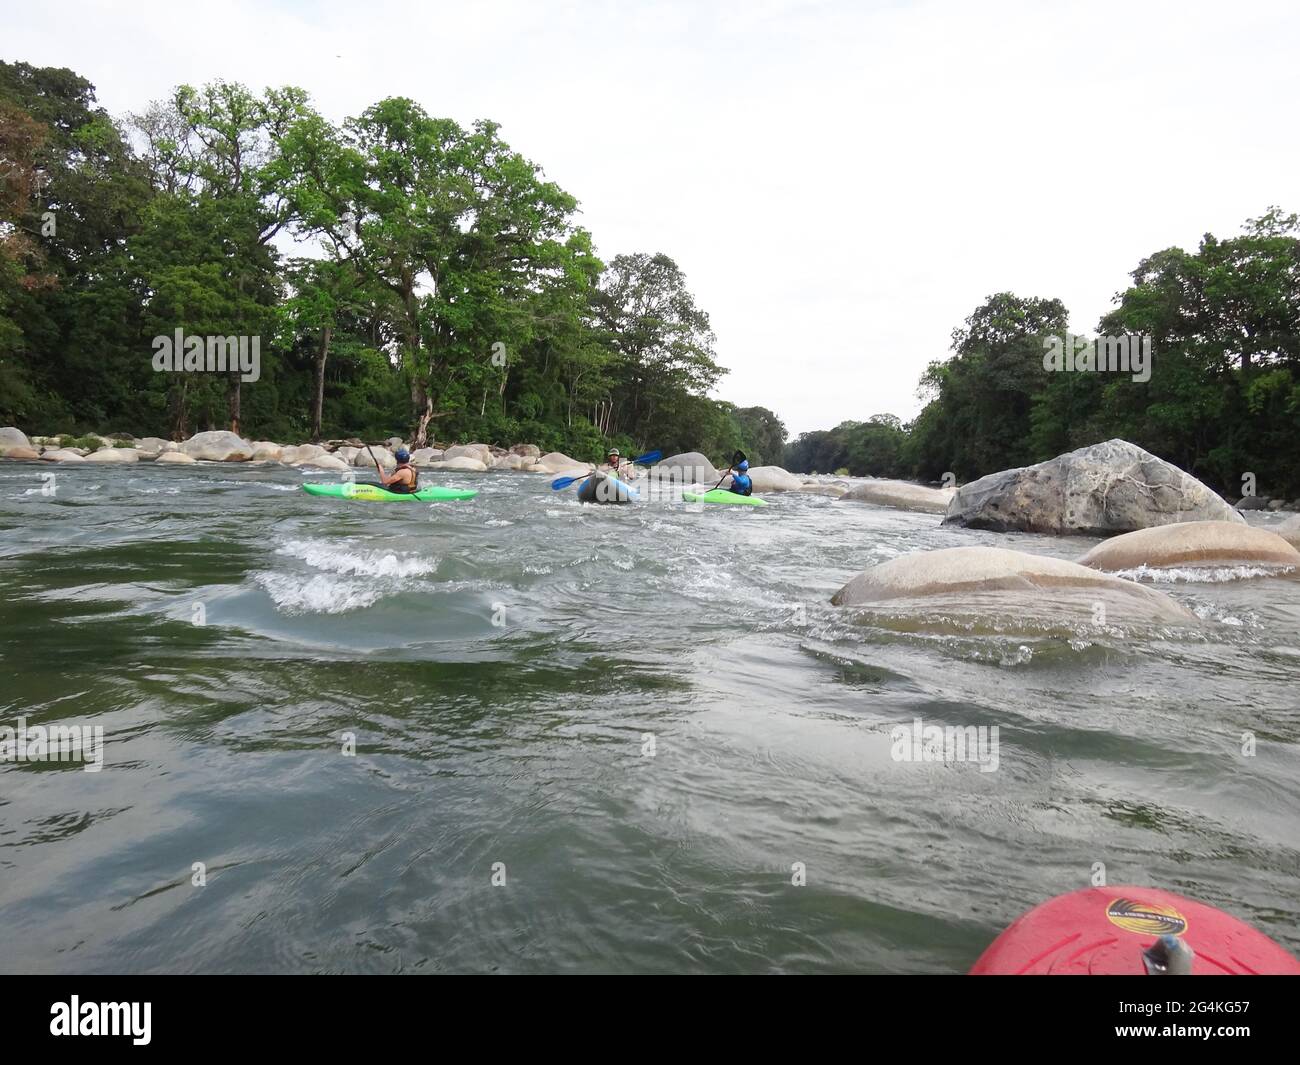 BARINAS, VENEZUELA - Apr 18, 2021: enjoy a rafting and padle surf in an unforgettable adventure on a mighty river Stock Photo